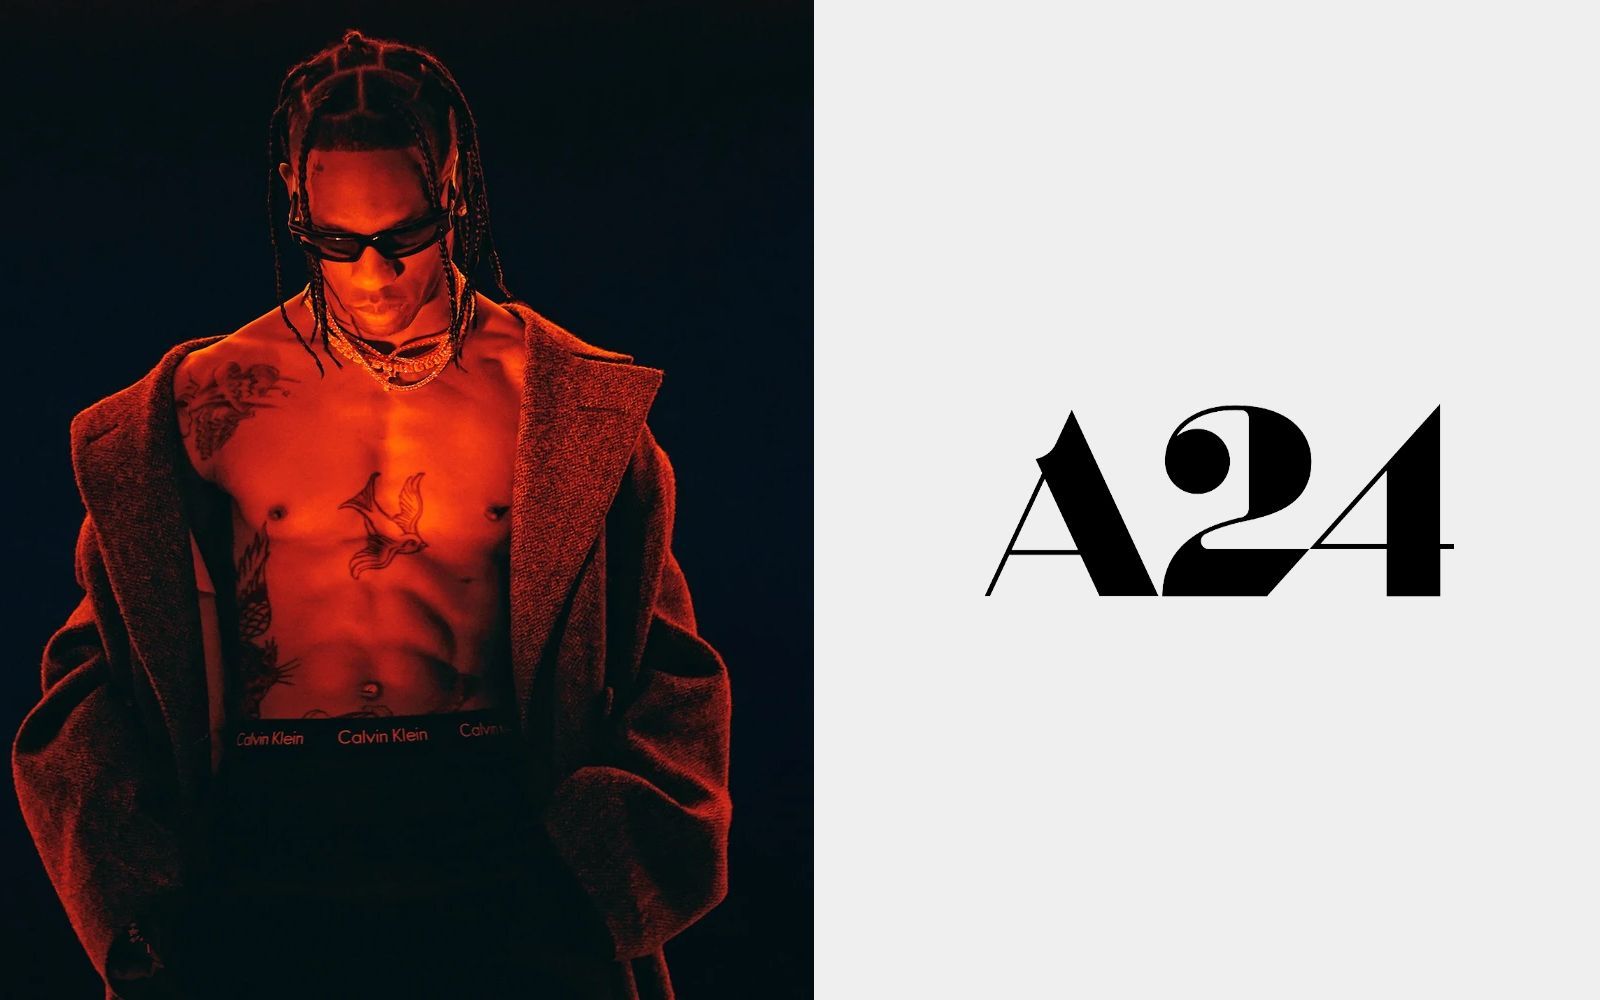 Travis Scott wrote a film for the A24 La Flame on the big screen